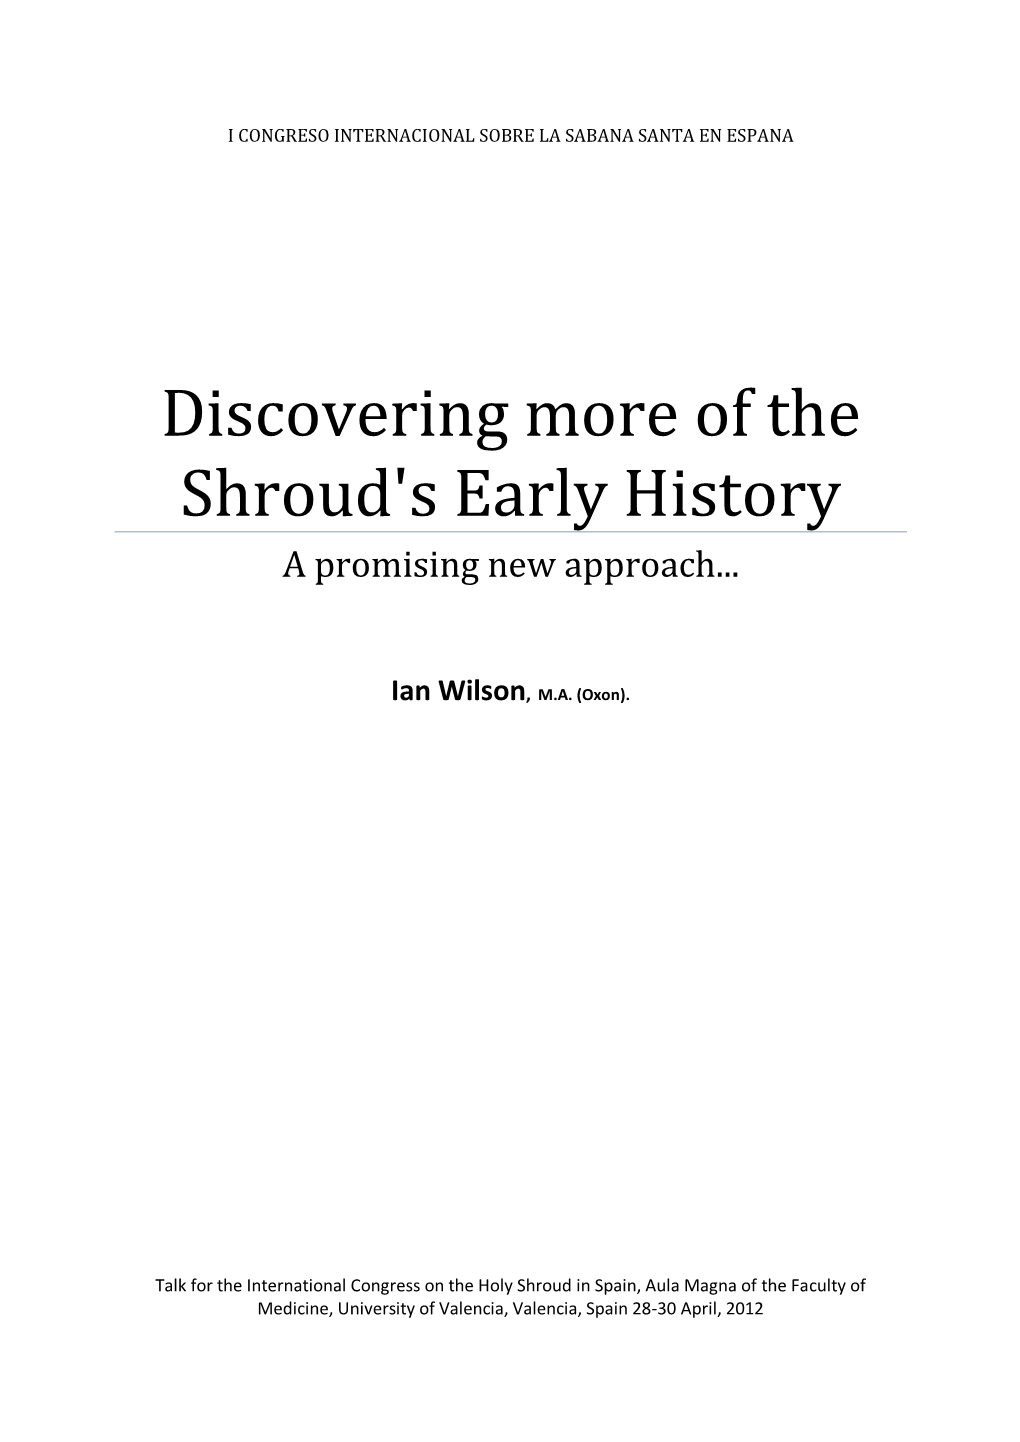 Discovering More of the Shroud's Early History a Promising New Approach